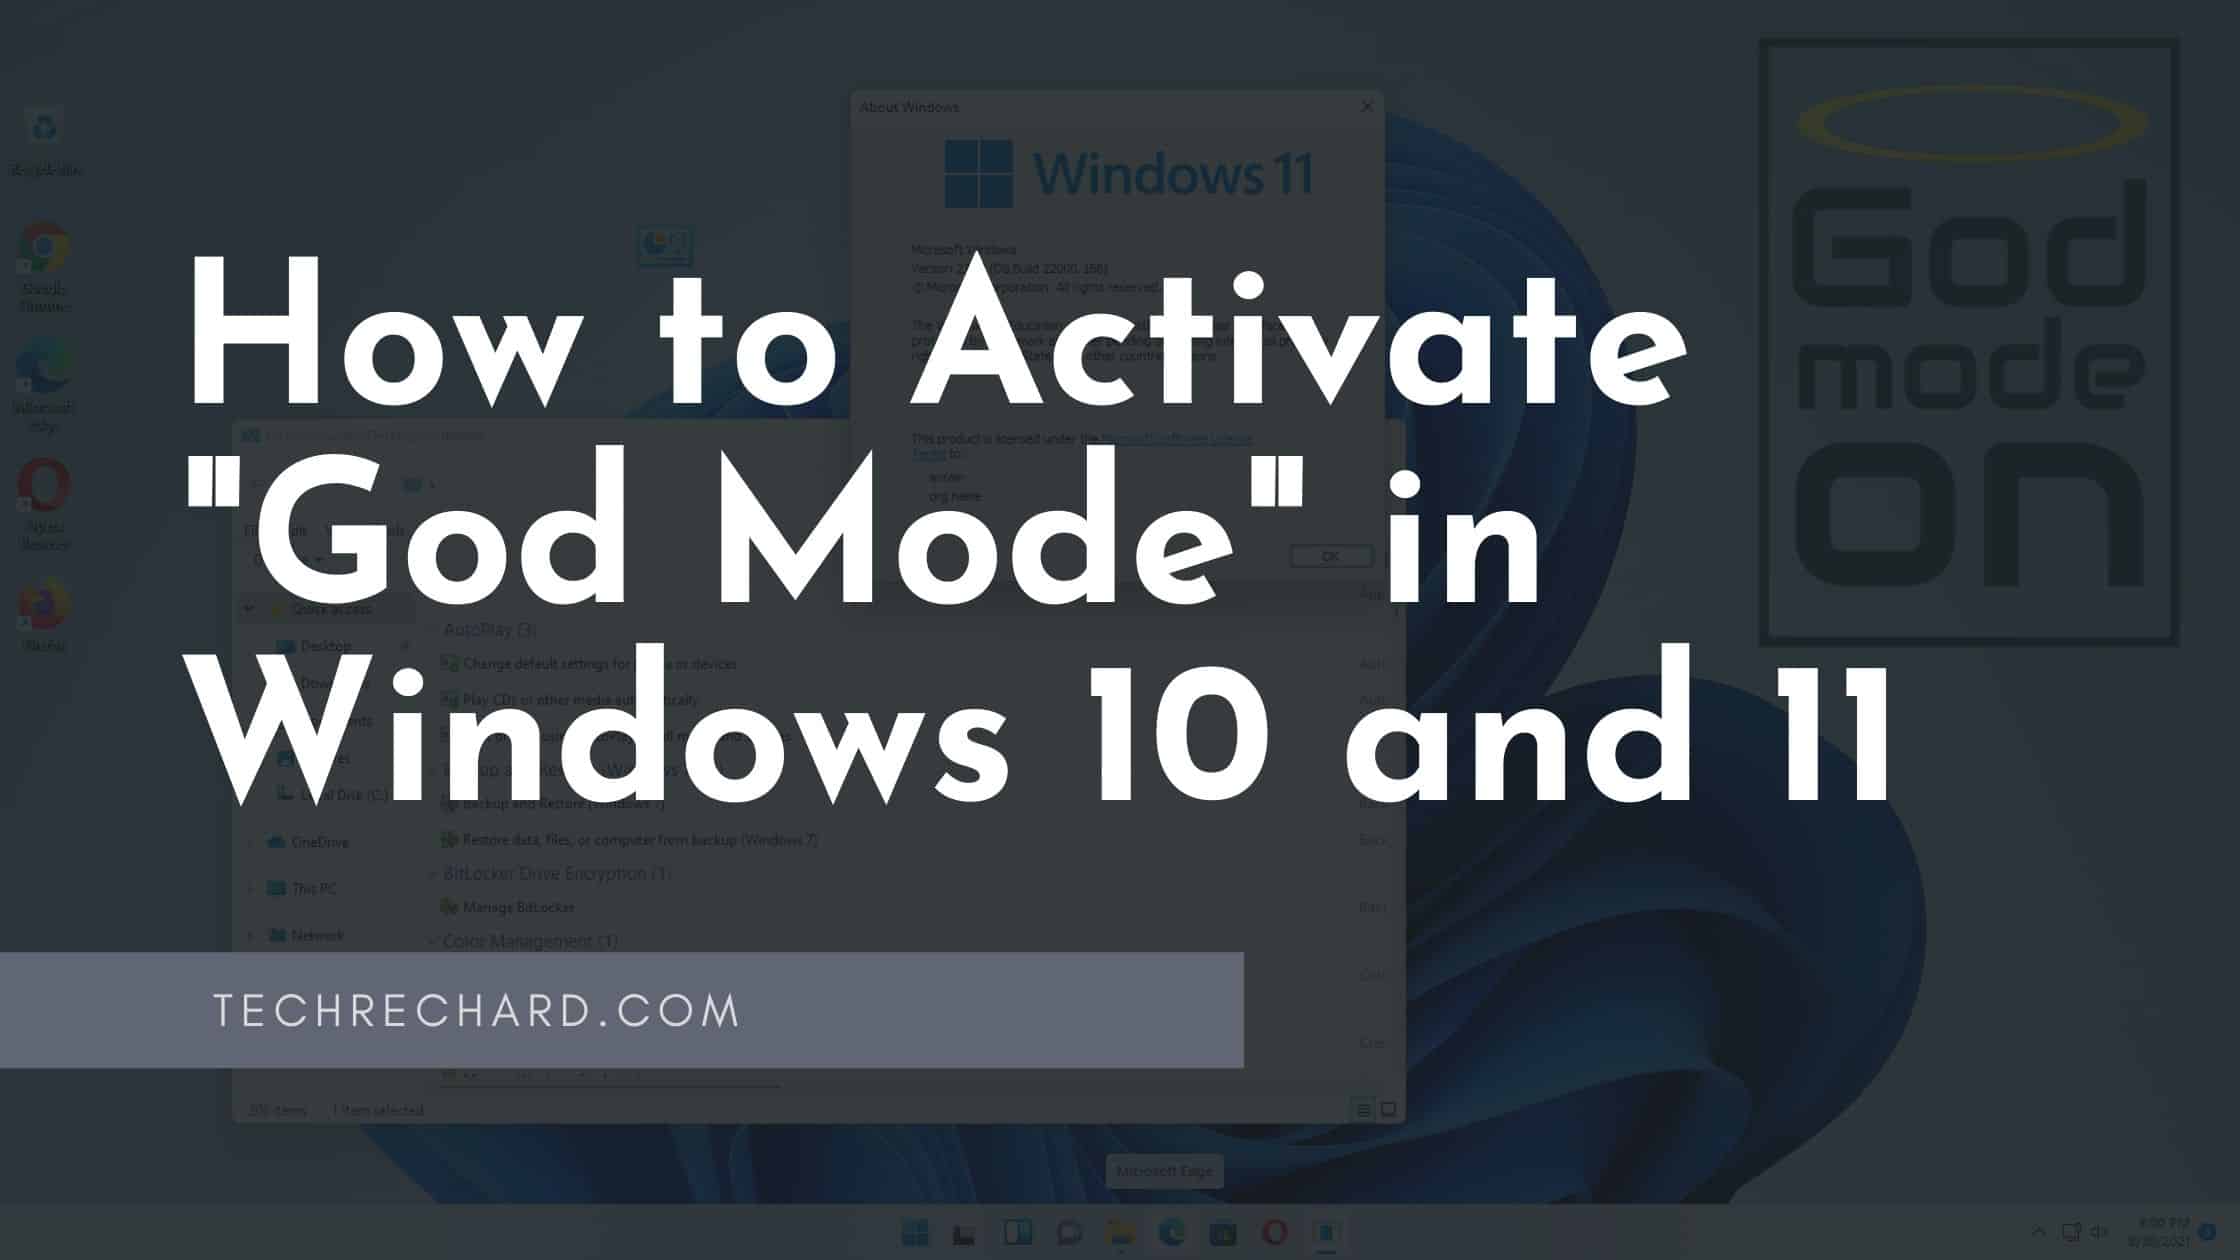 How to Activate "God Mode" in Windows 10 and 11